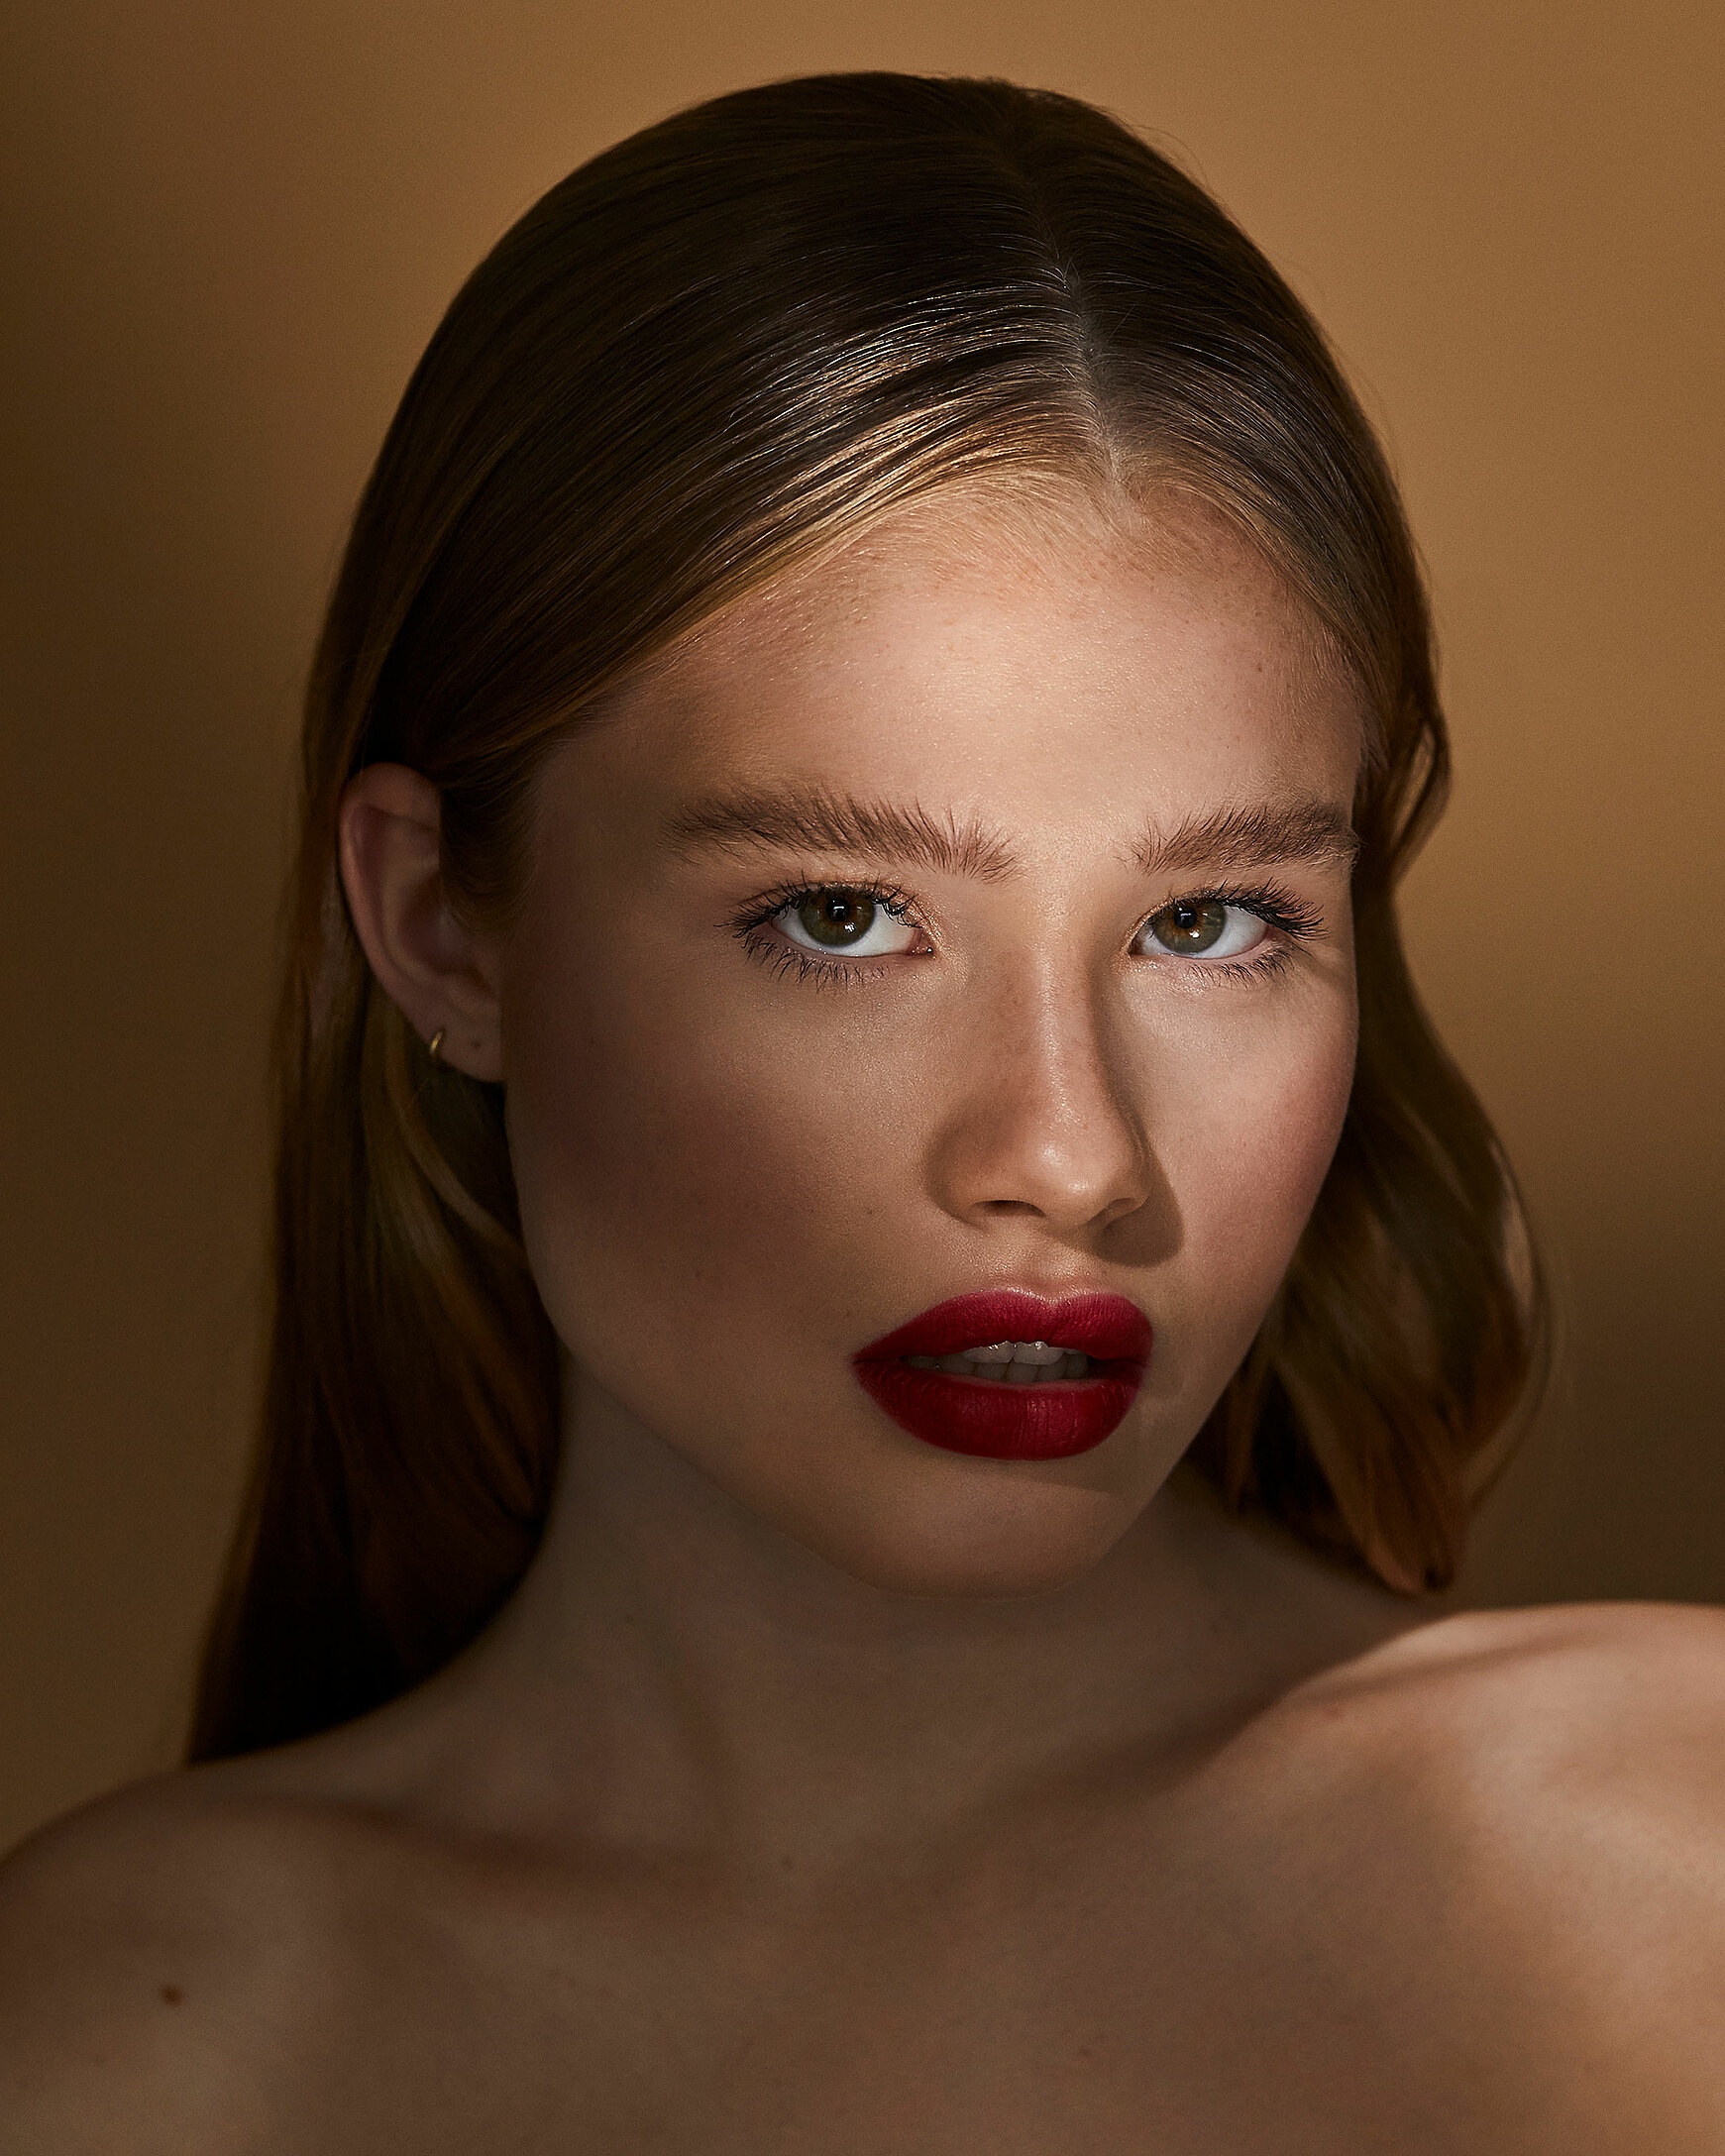 A female blonde model with red lips in a strong pose with sleek hairs